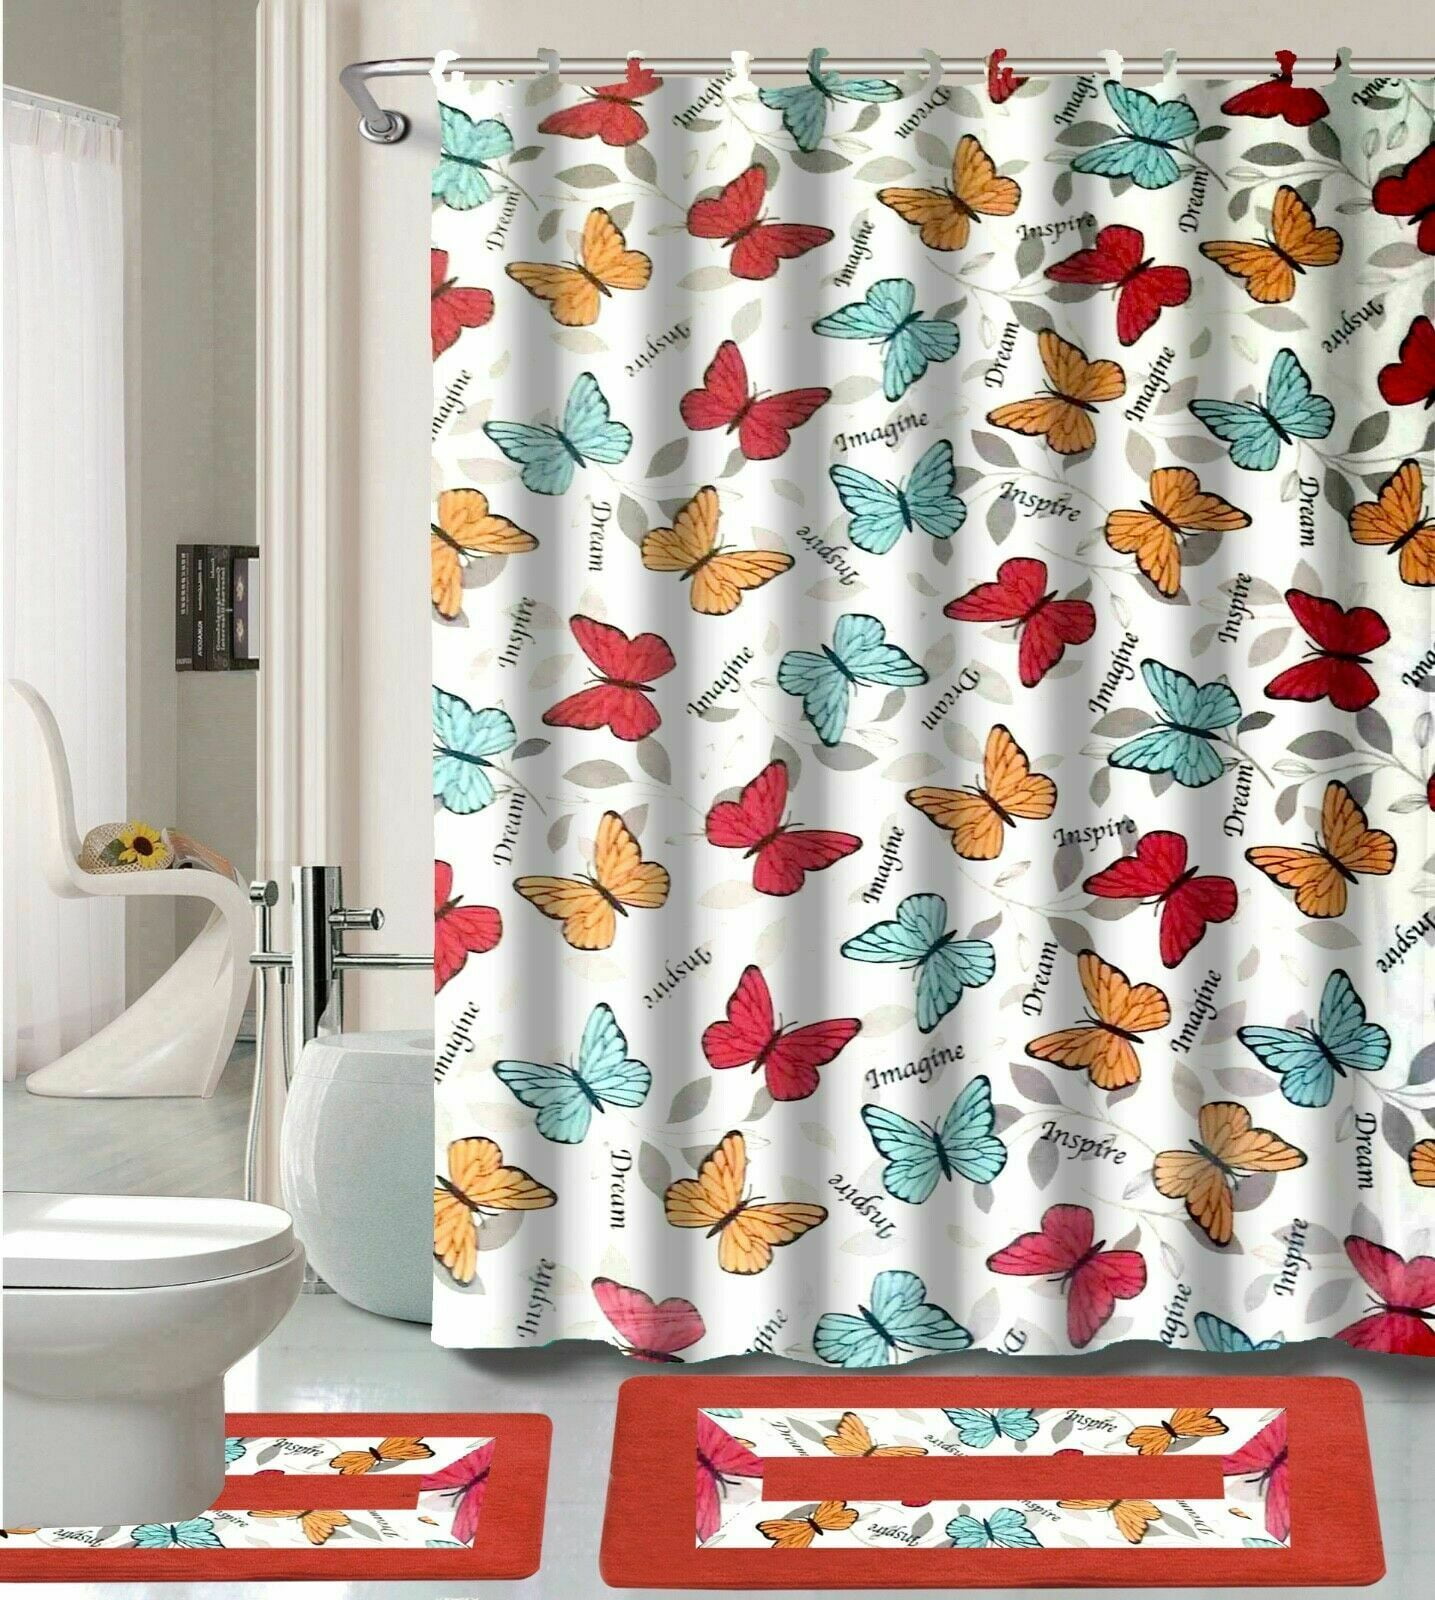 Butterfly Bathroom Rugs Set Shower Curtain NonSlip Toilet Lid Cover Bath Mat NEW 